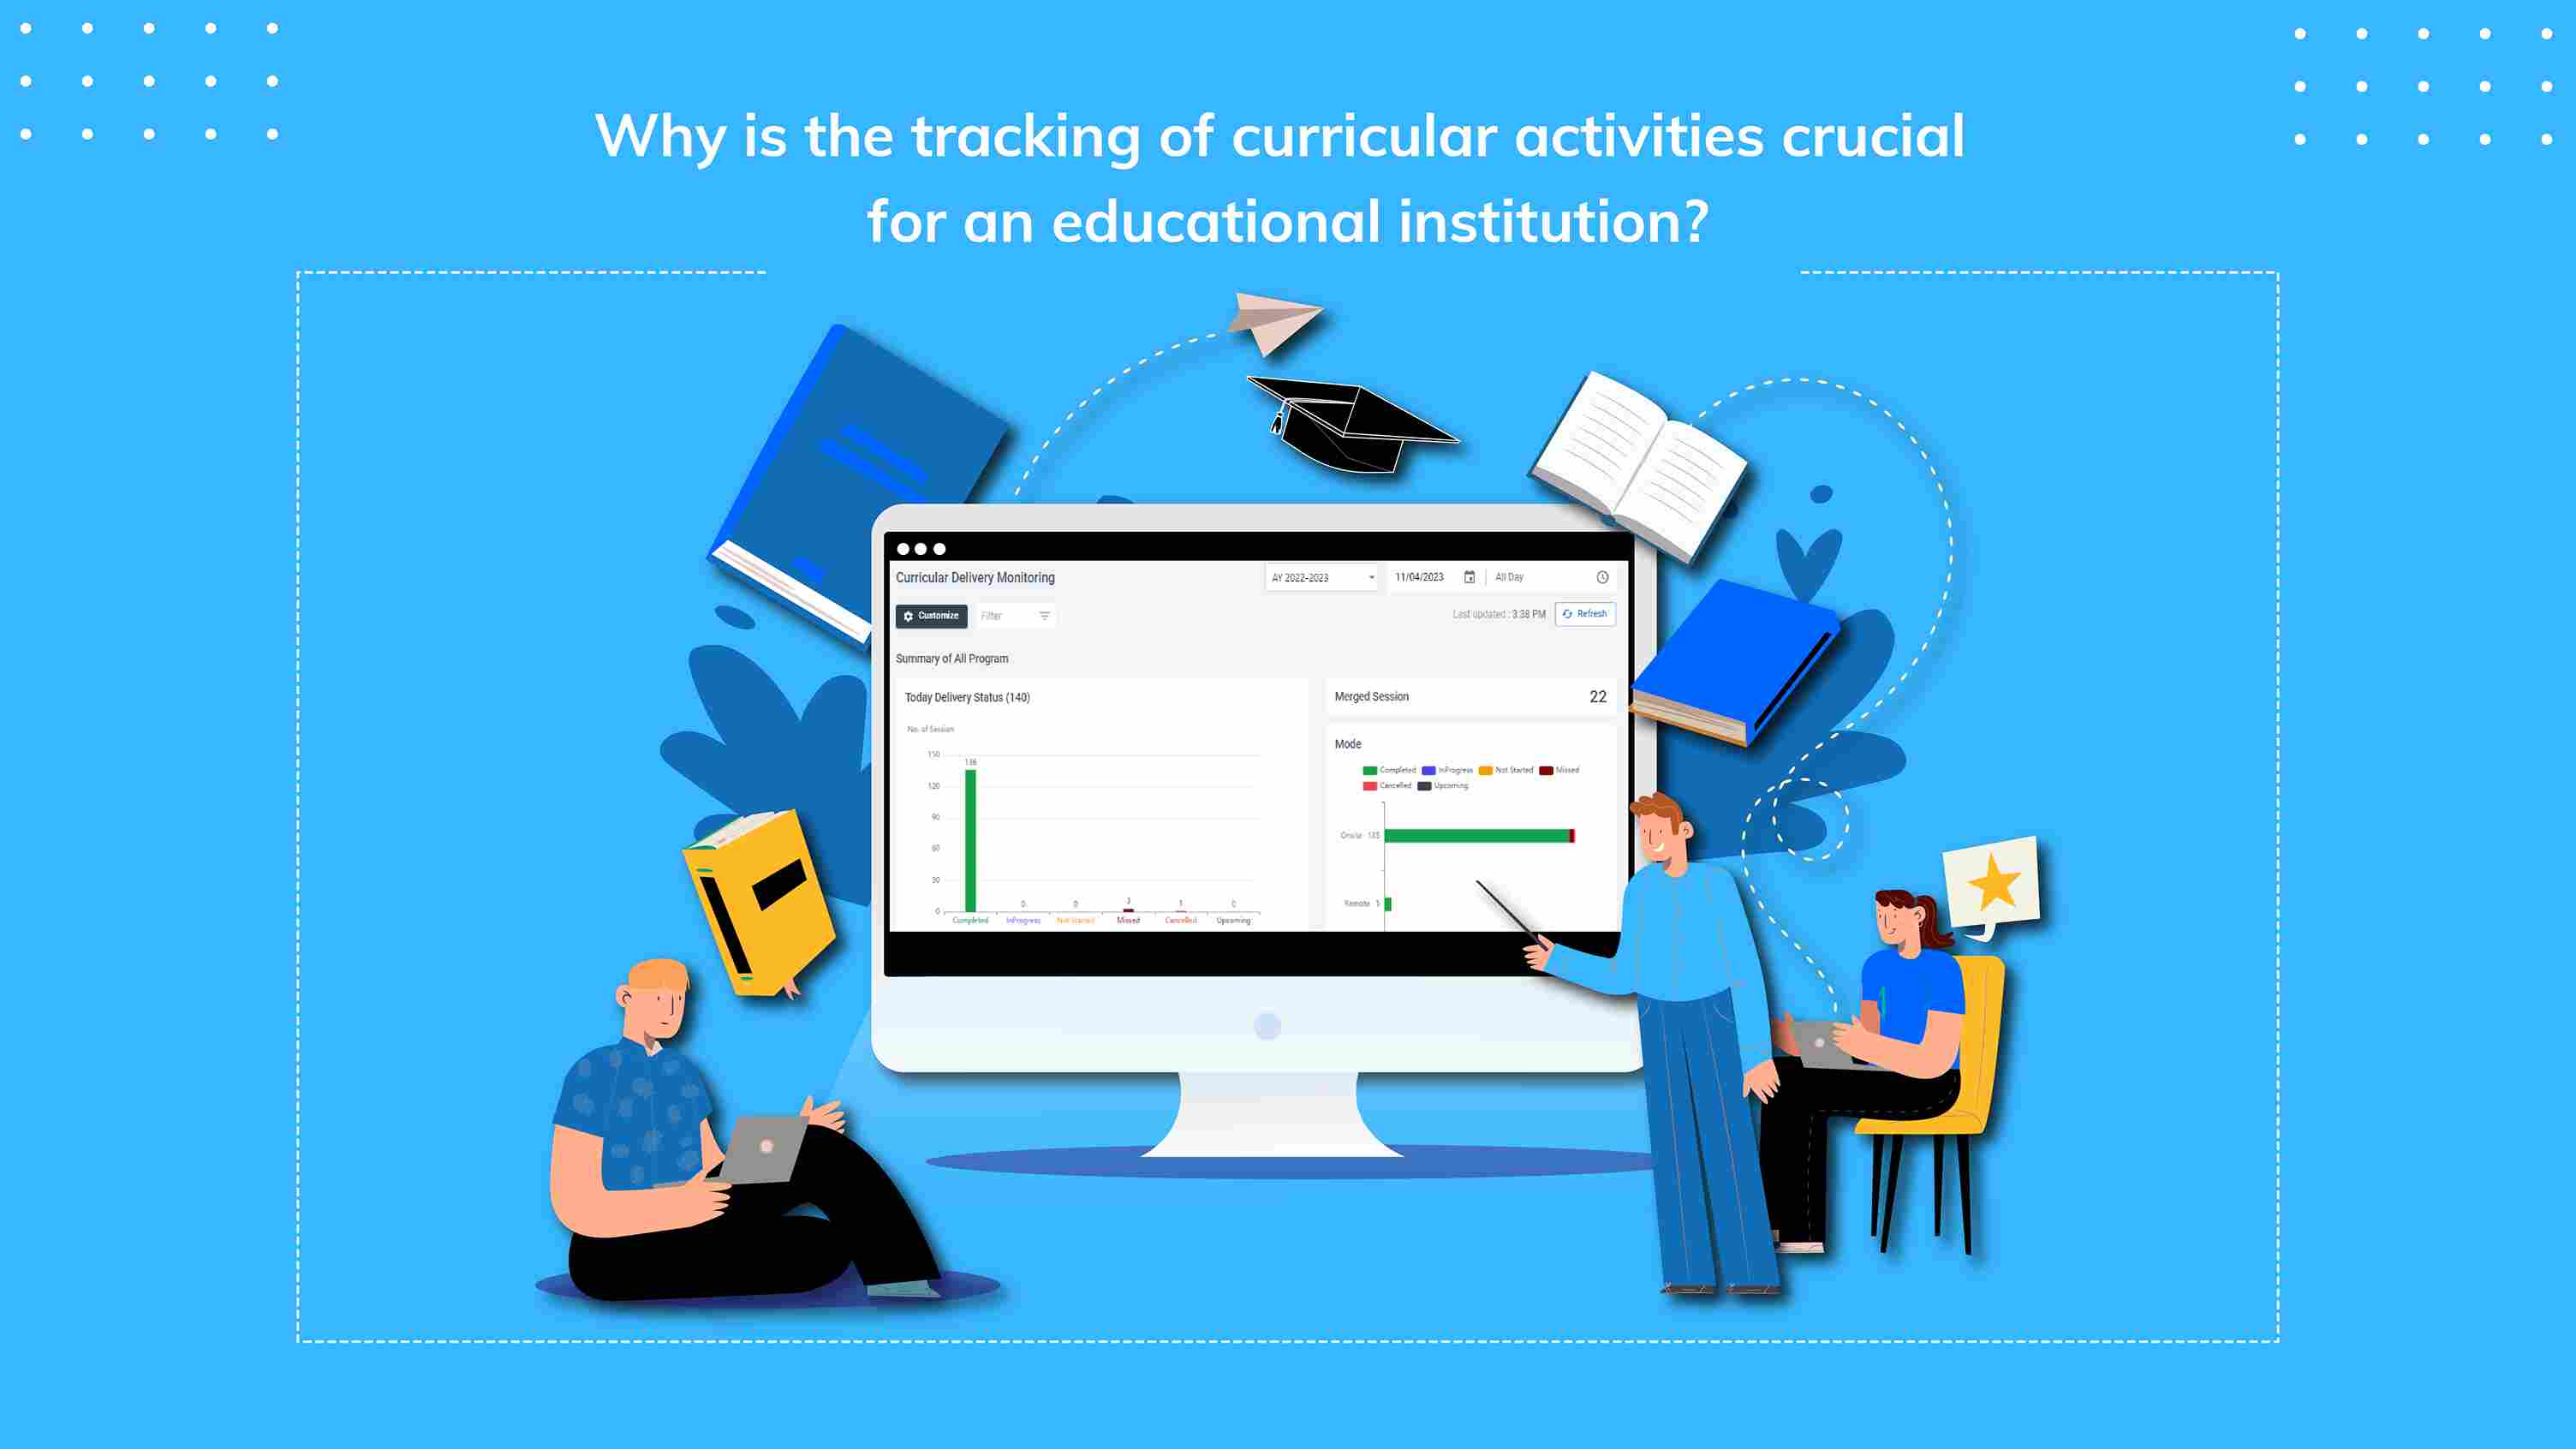 Why is the tracking of curricular activities crucial for an educational institution?